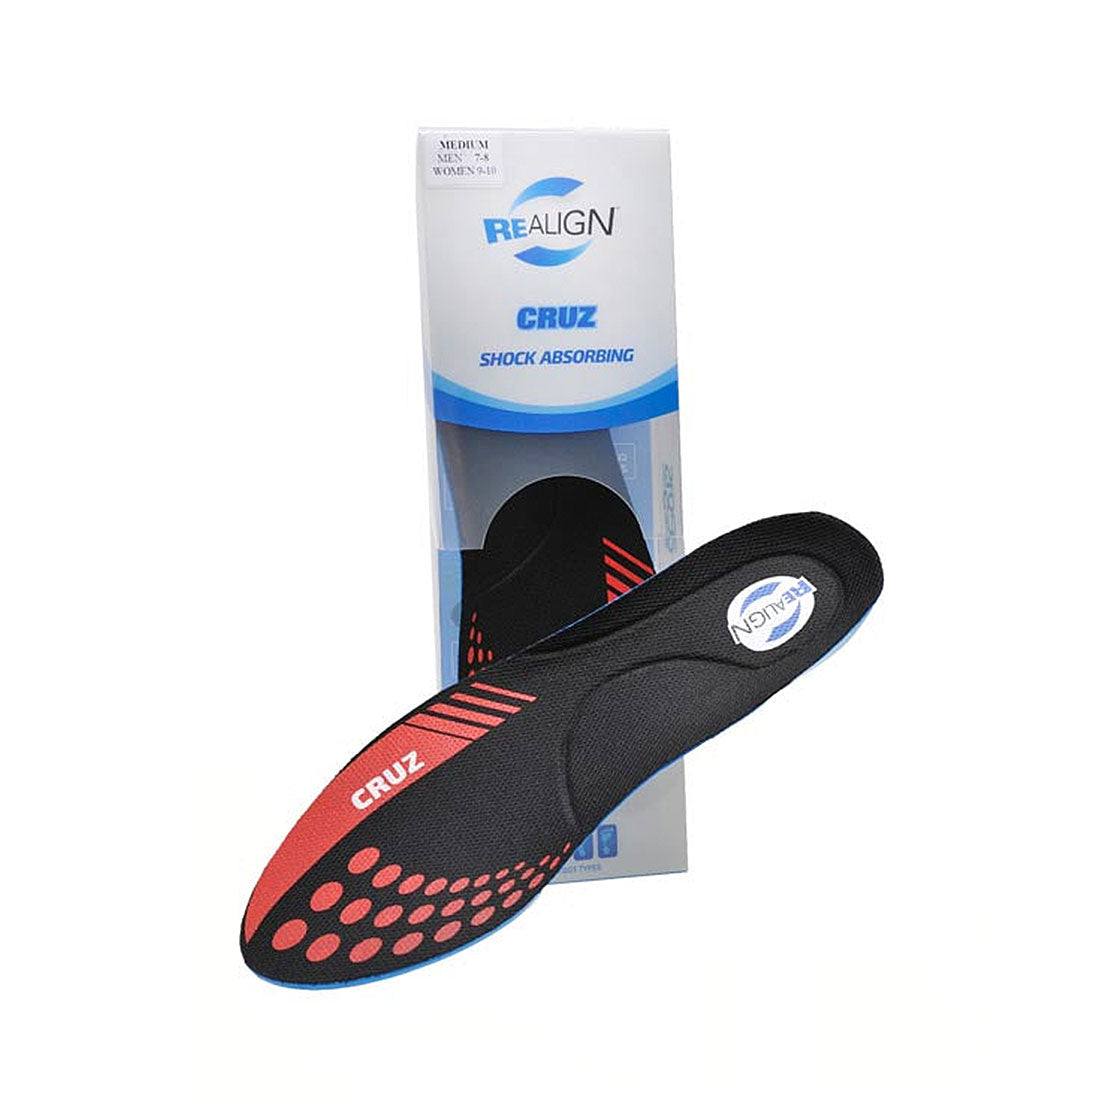 Realign Cruz Innersole Insoles and Fitting Aids